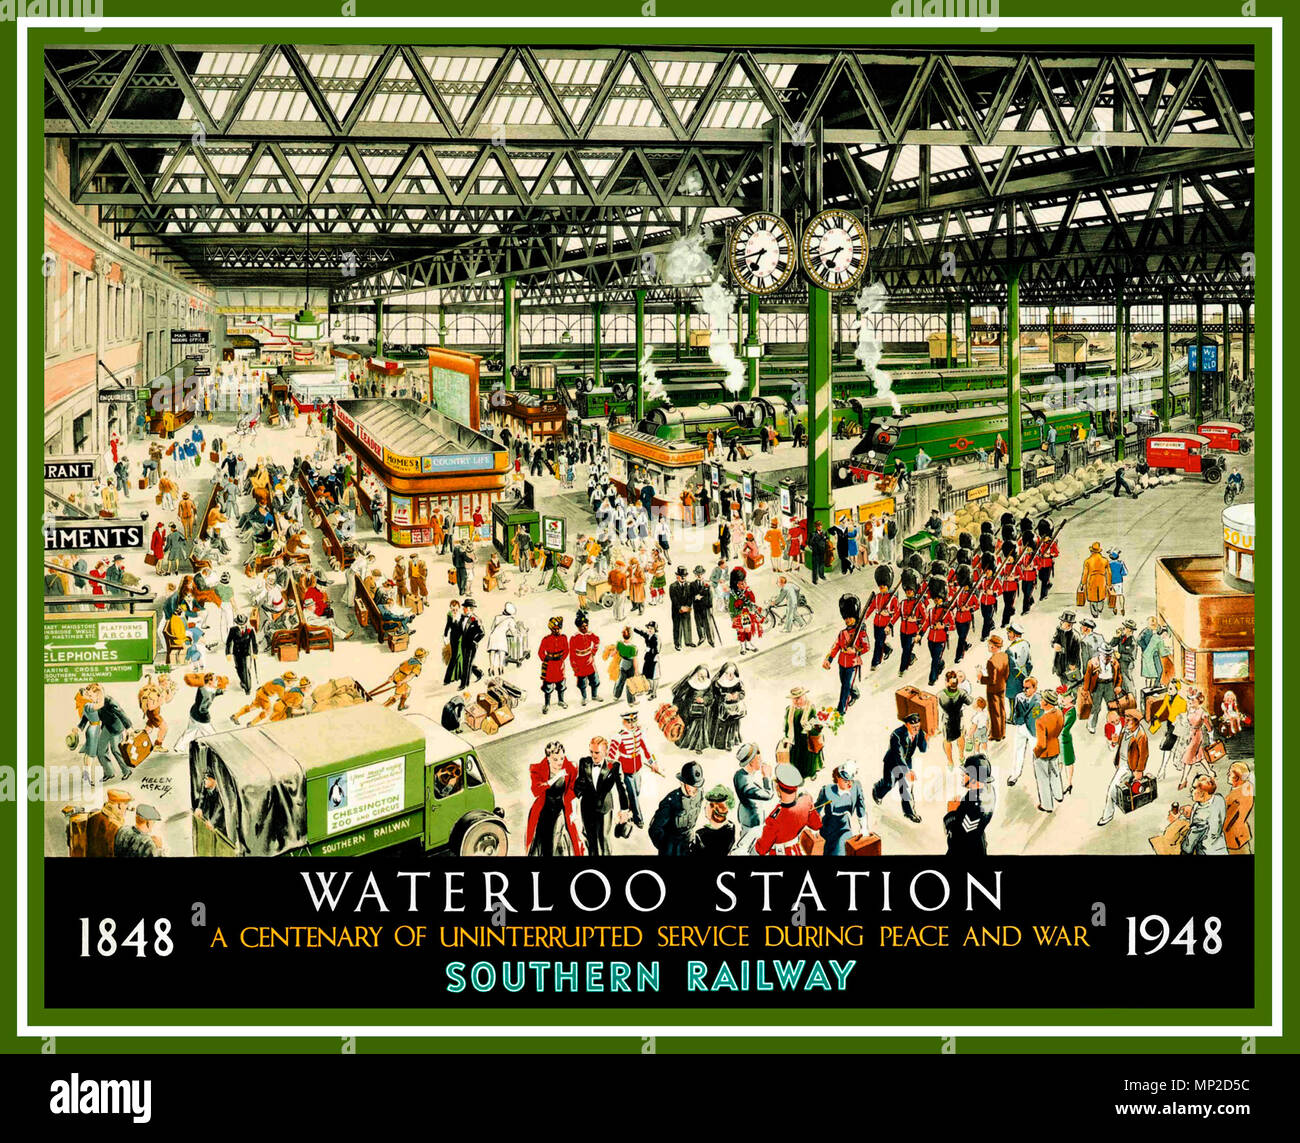 VINTAGE HISTORIC WATERLOO STATION POSTER LONDON UK 1948 Vintage Southern Railway Station Poster illustration Waterloo Station 1848-1948 centenary celebration peace and war 100 years Stock Photo